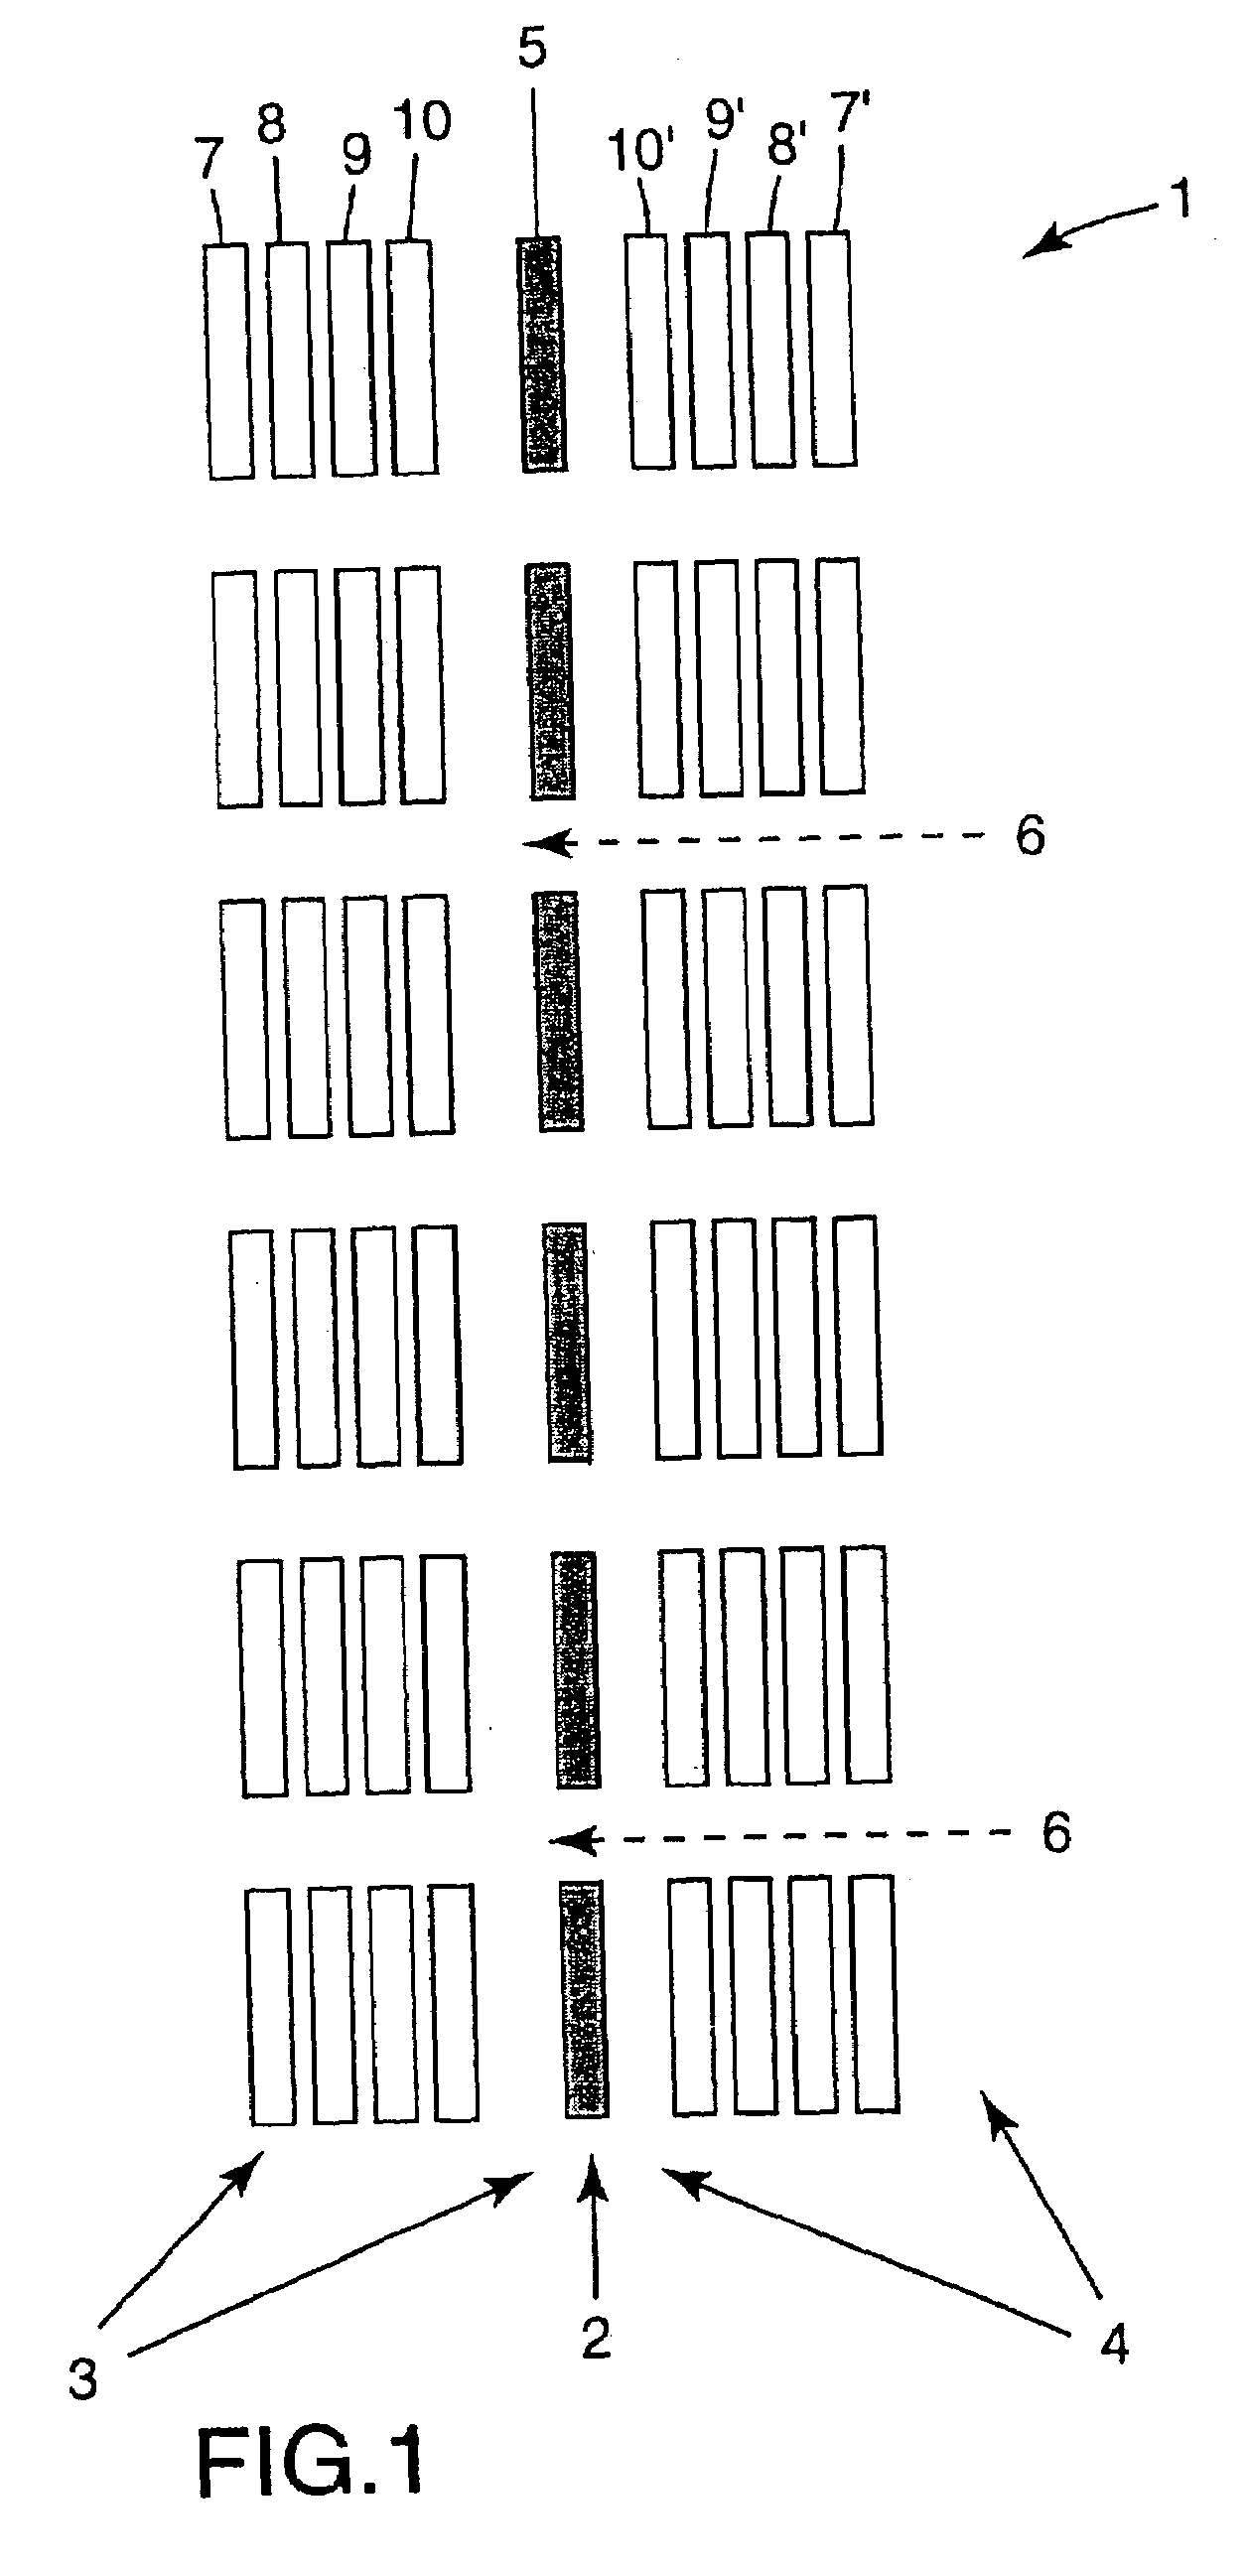 Display unit and methods of displaying an image